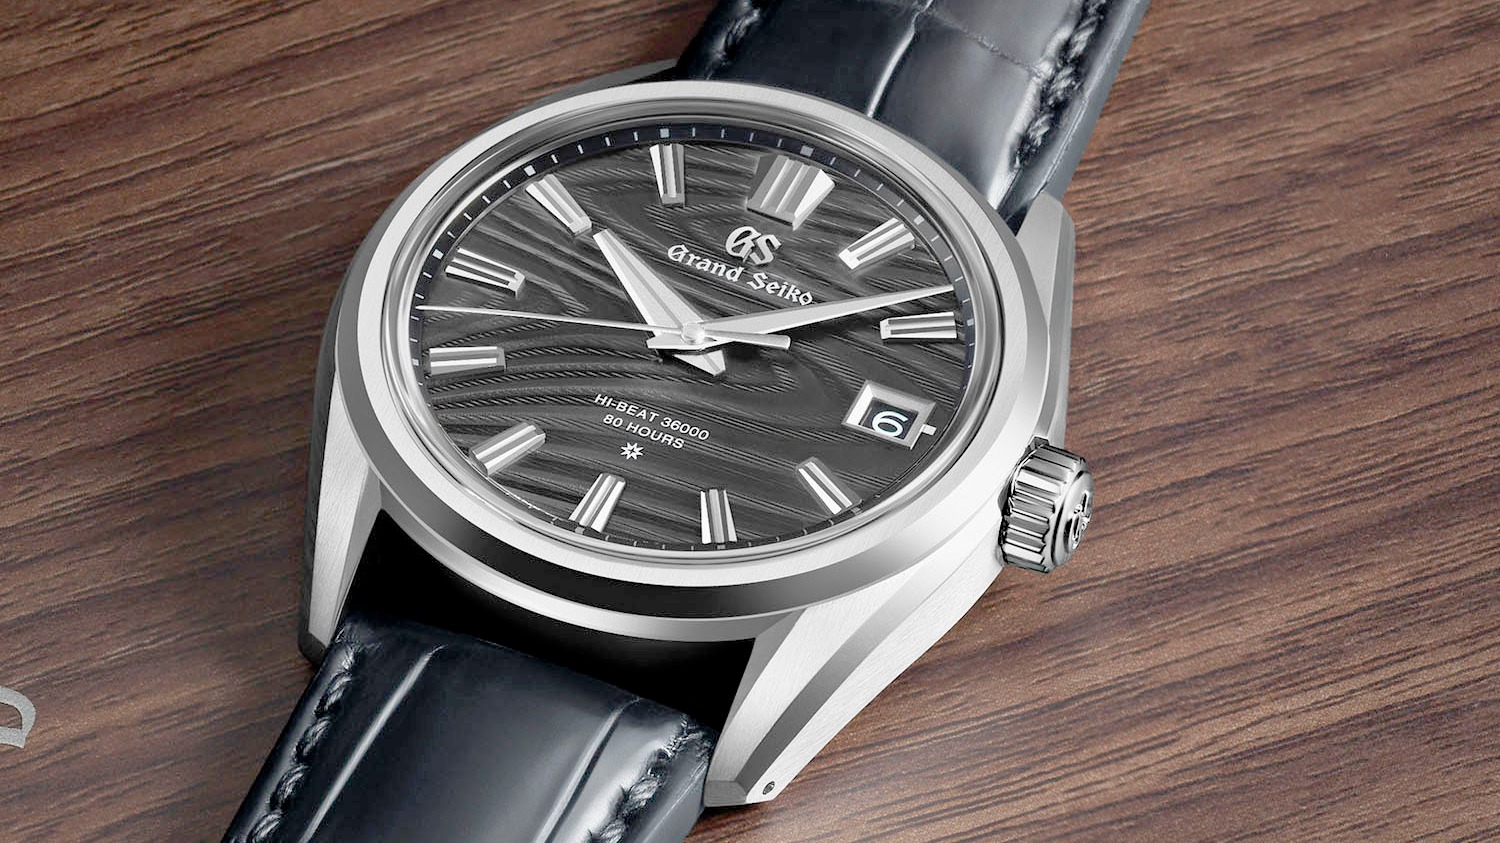 Deconstructed Watch: Grand Seiko Tree Rings | Financial Times